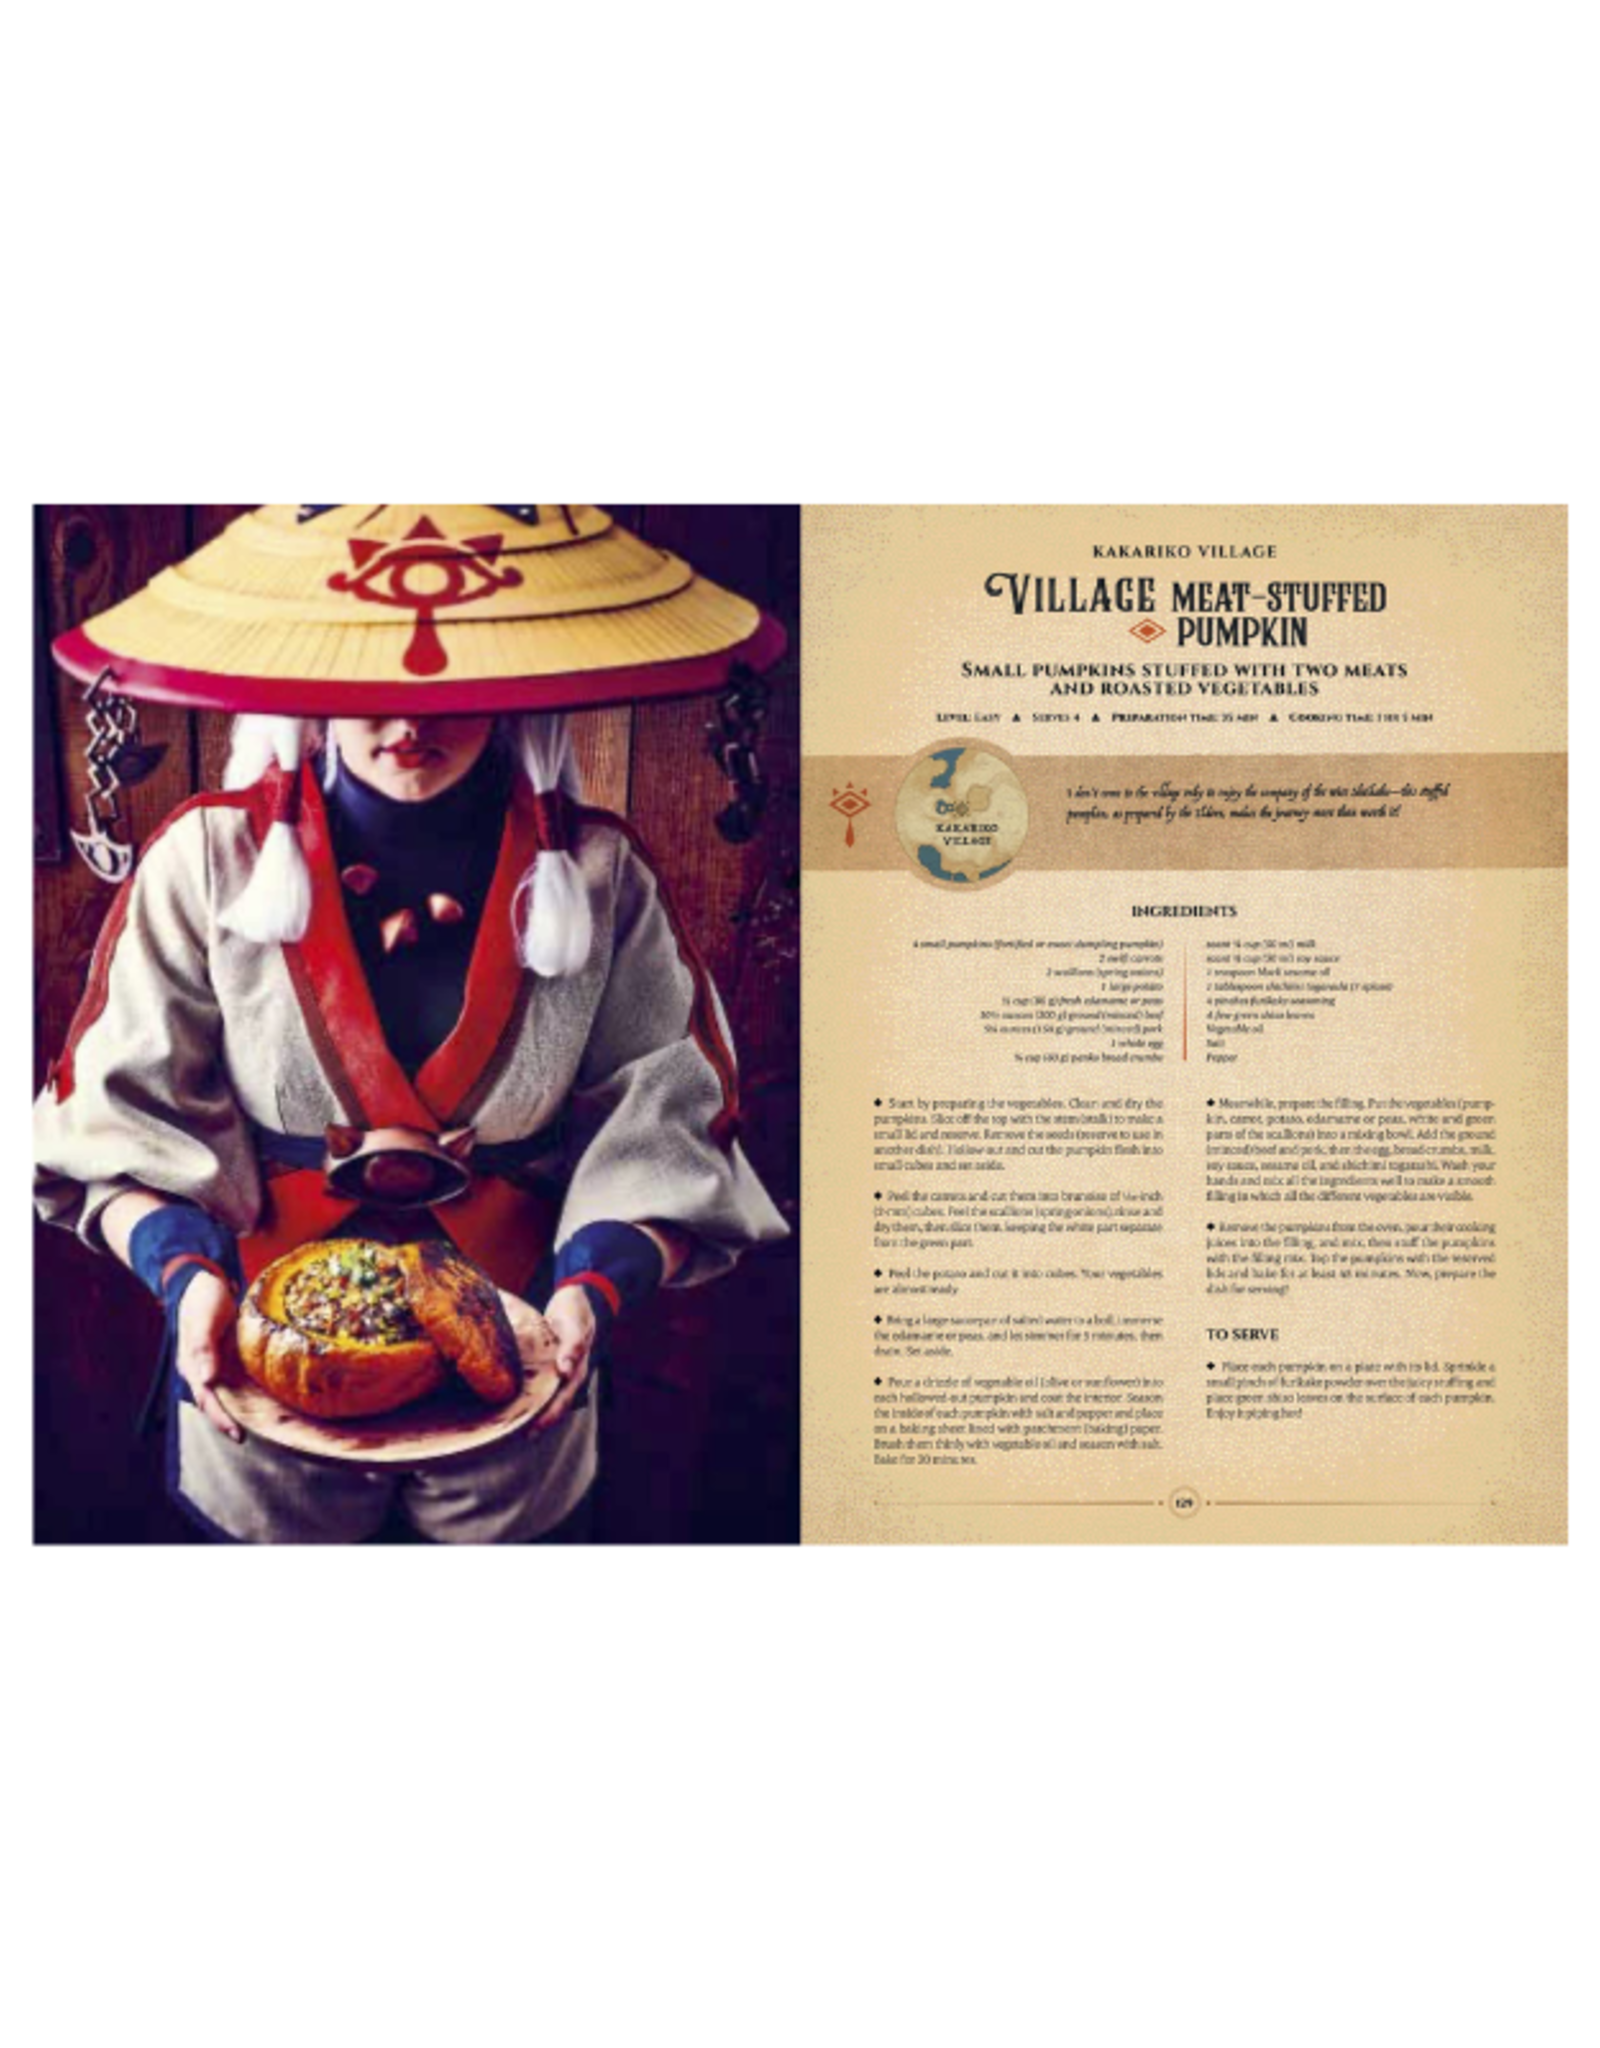 GastronoGeek The Unofficial Zelda Cookbook: Recipes Inspired by the Legend